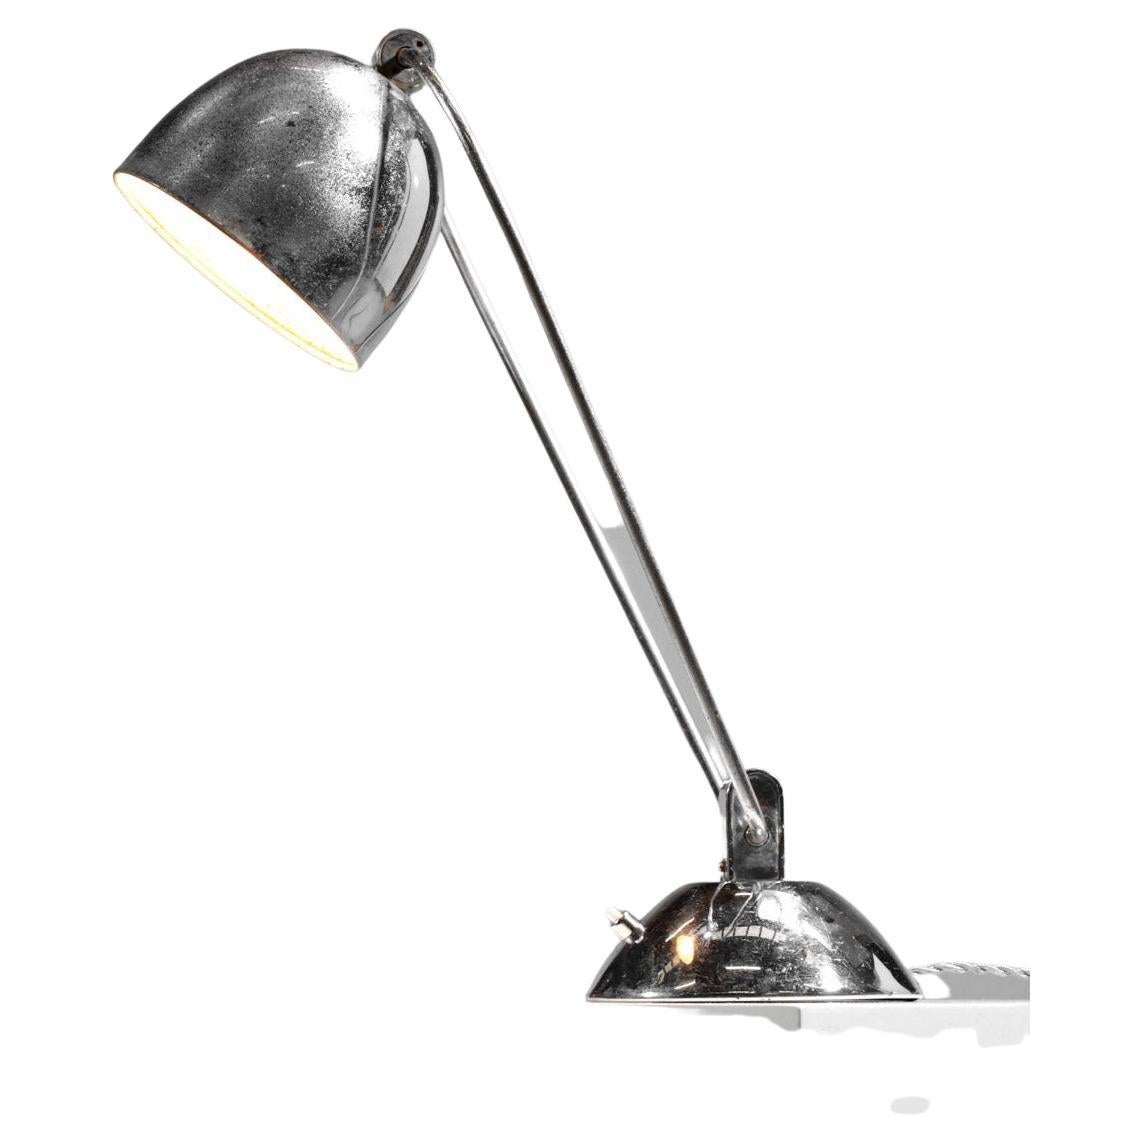 Modernist style desk or accent lamp in the style of Desny's work. All metal chrome plated, please note some pitting on the shade (see pictures). Very nice vintage condition, recommended led bulb type B22.